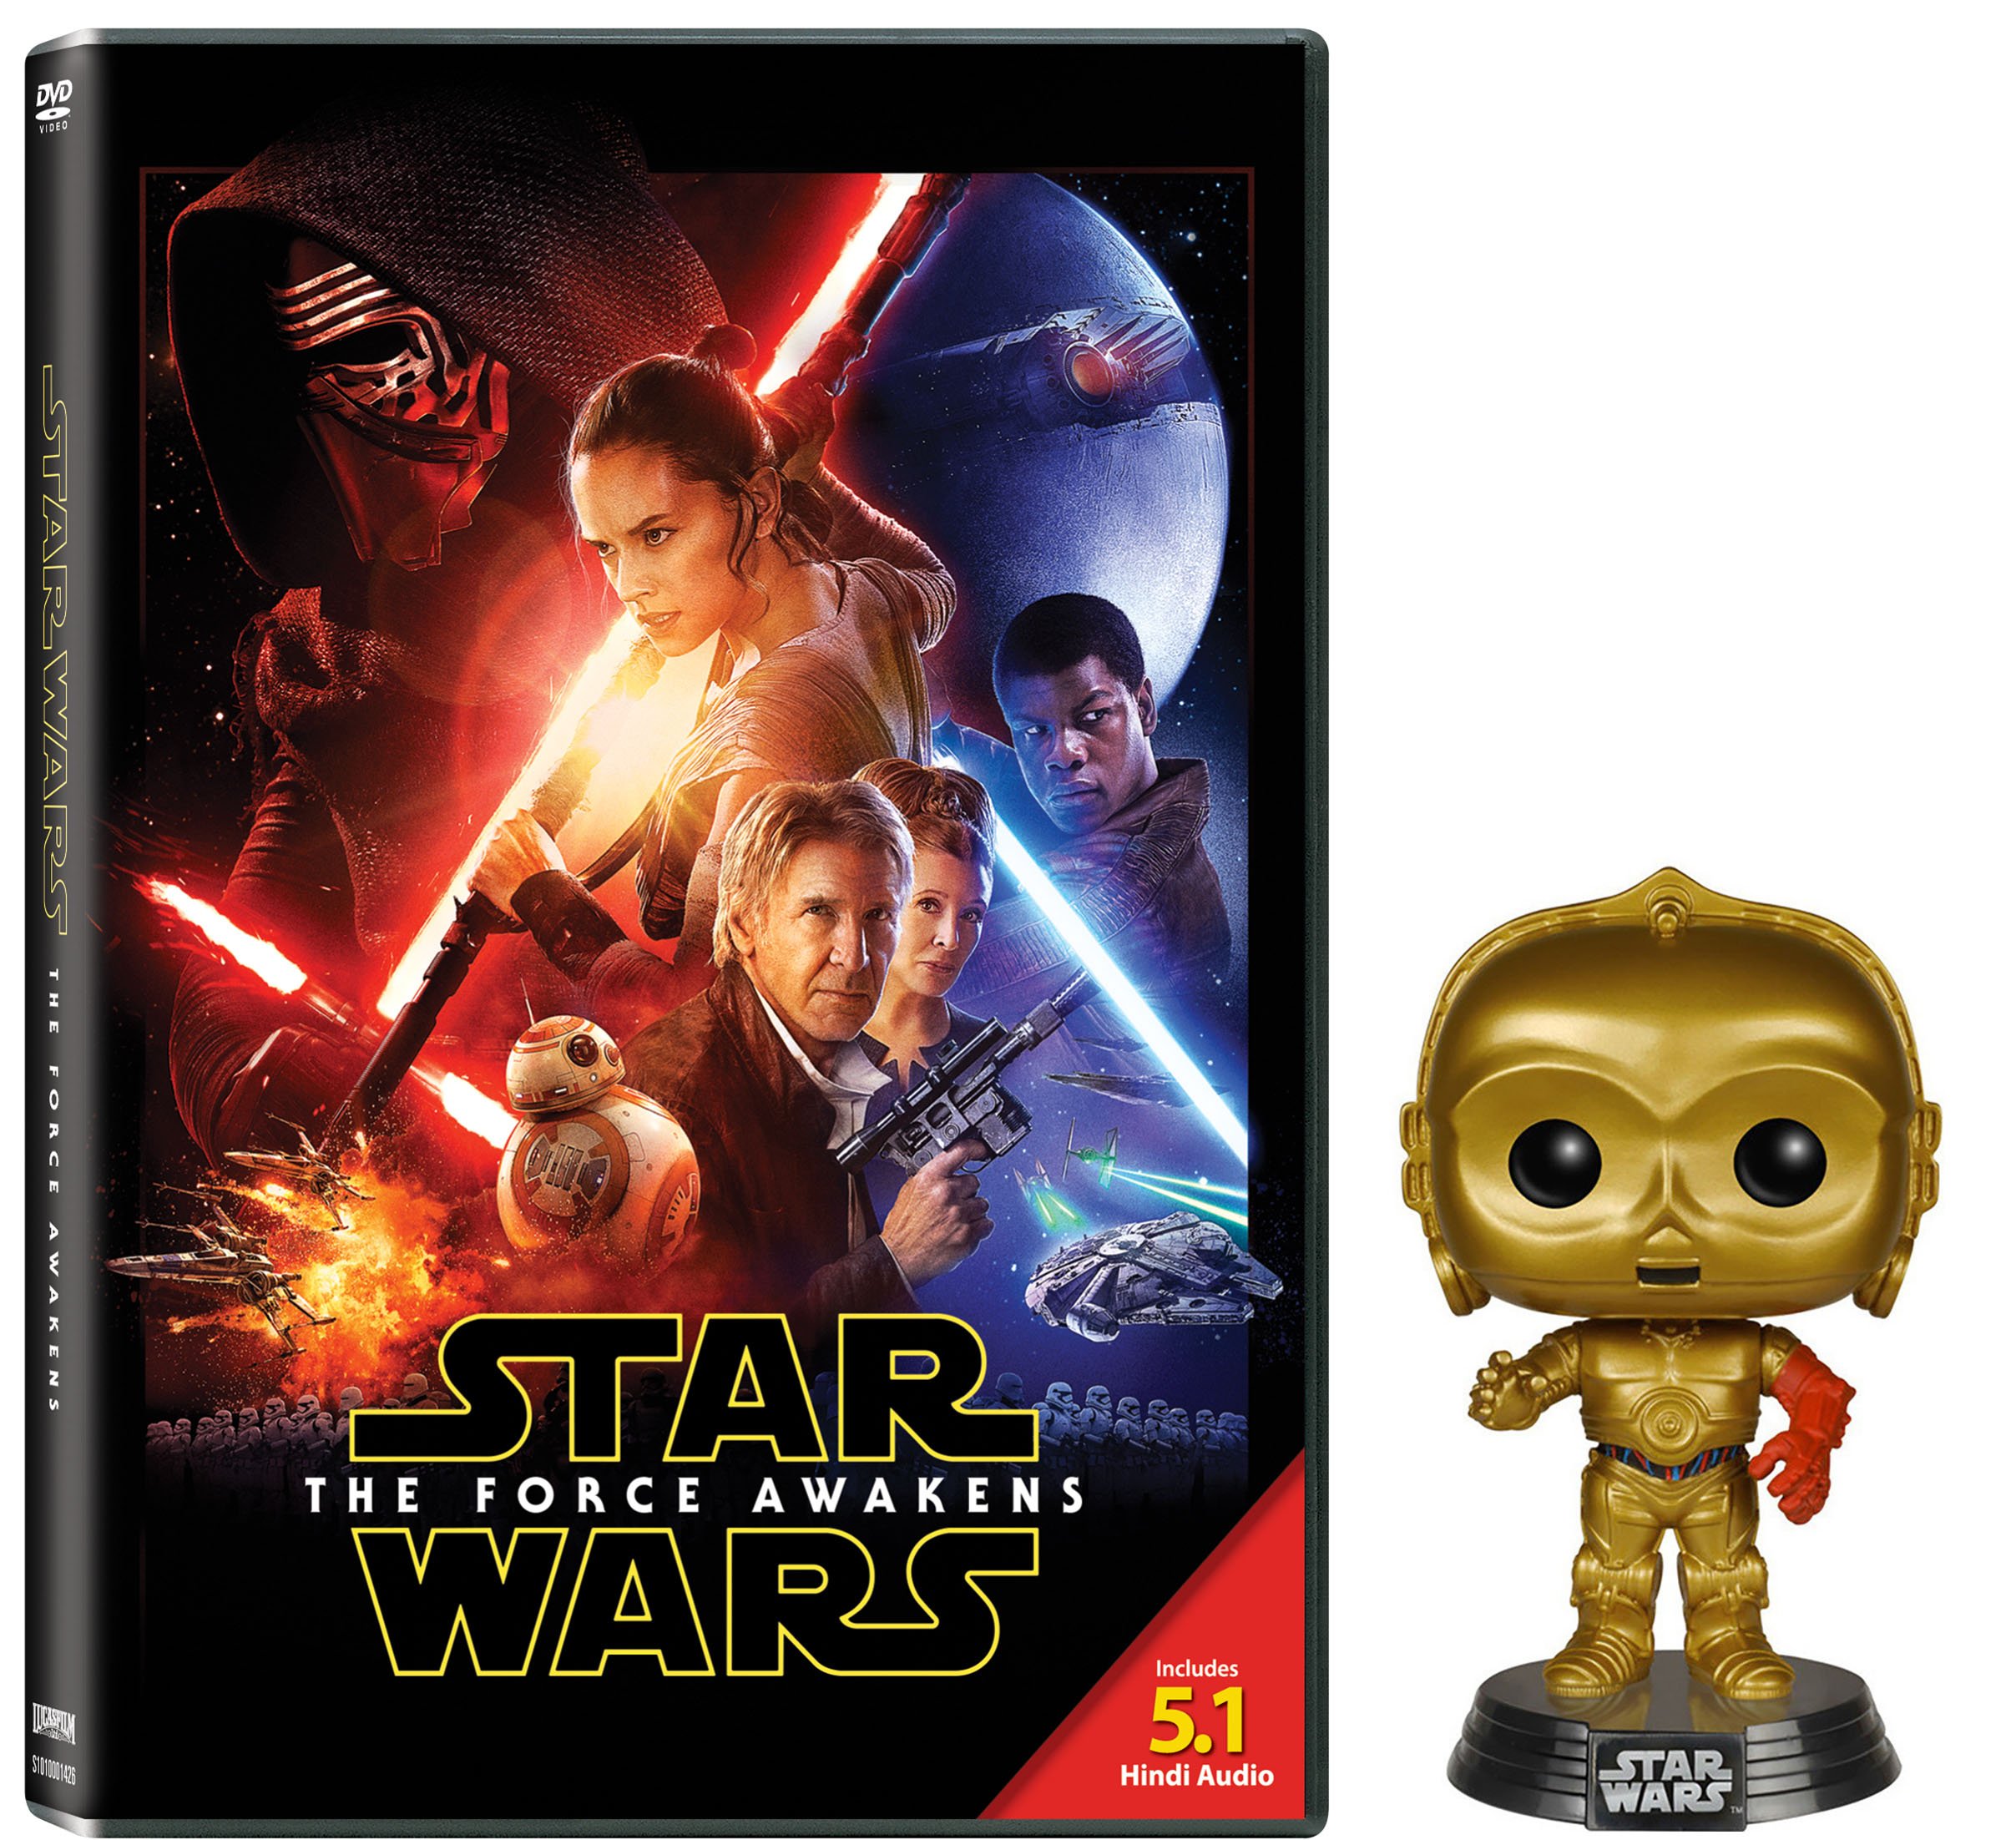 star-wars-the-force-awakens-with-c-3po-bobble-head-movie-purchase-or